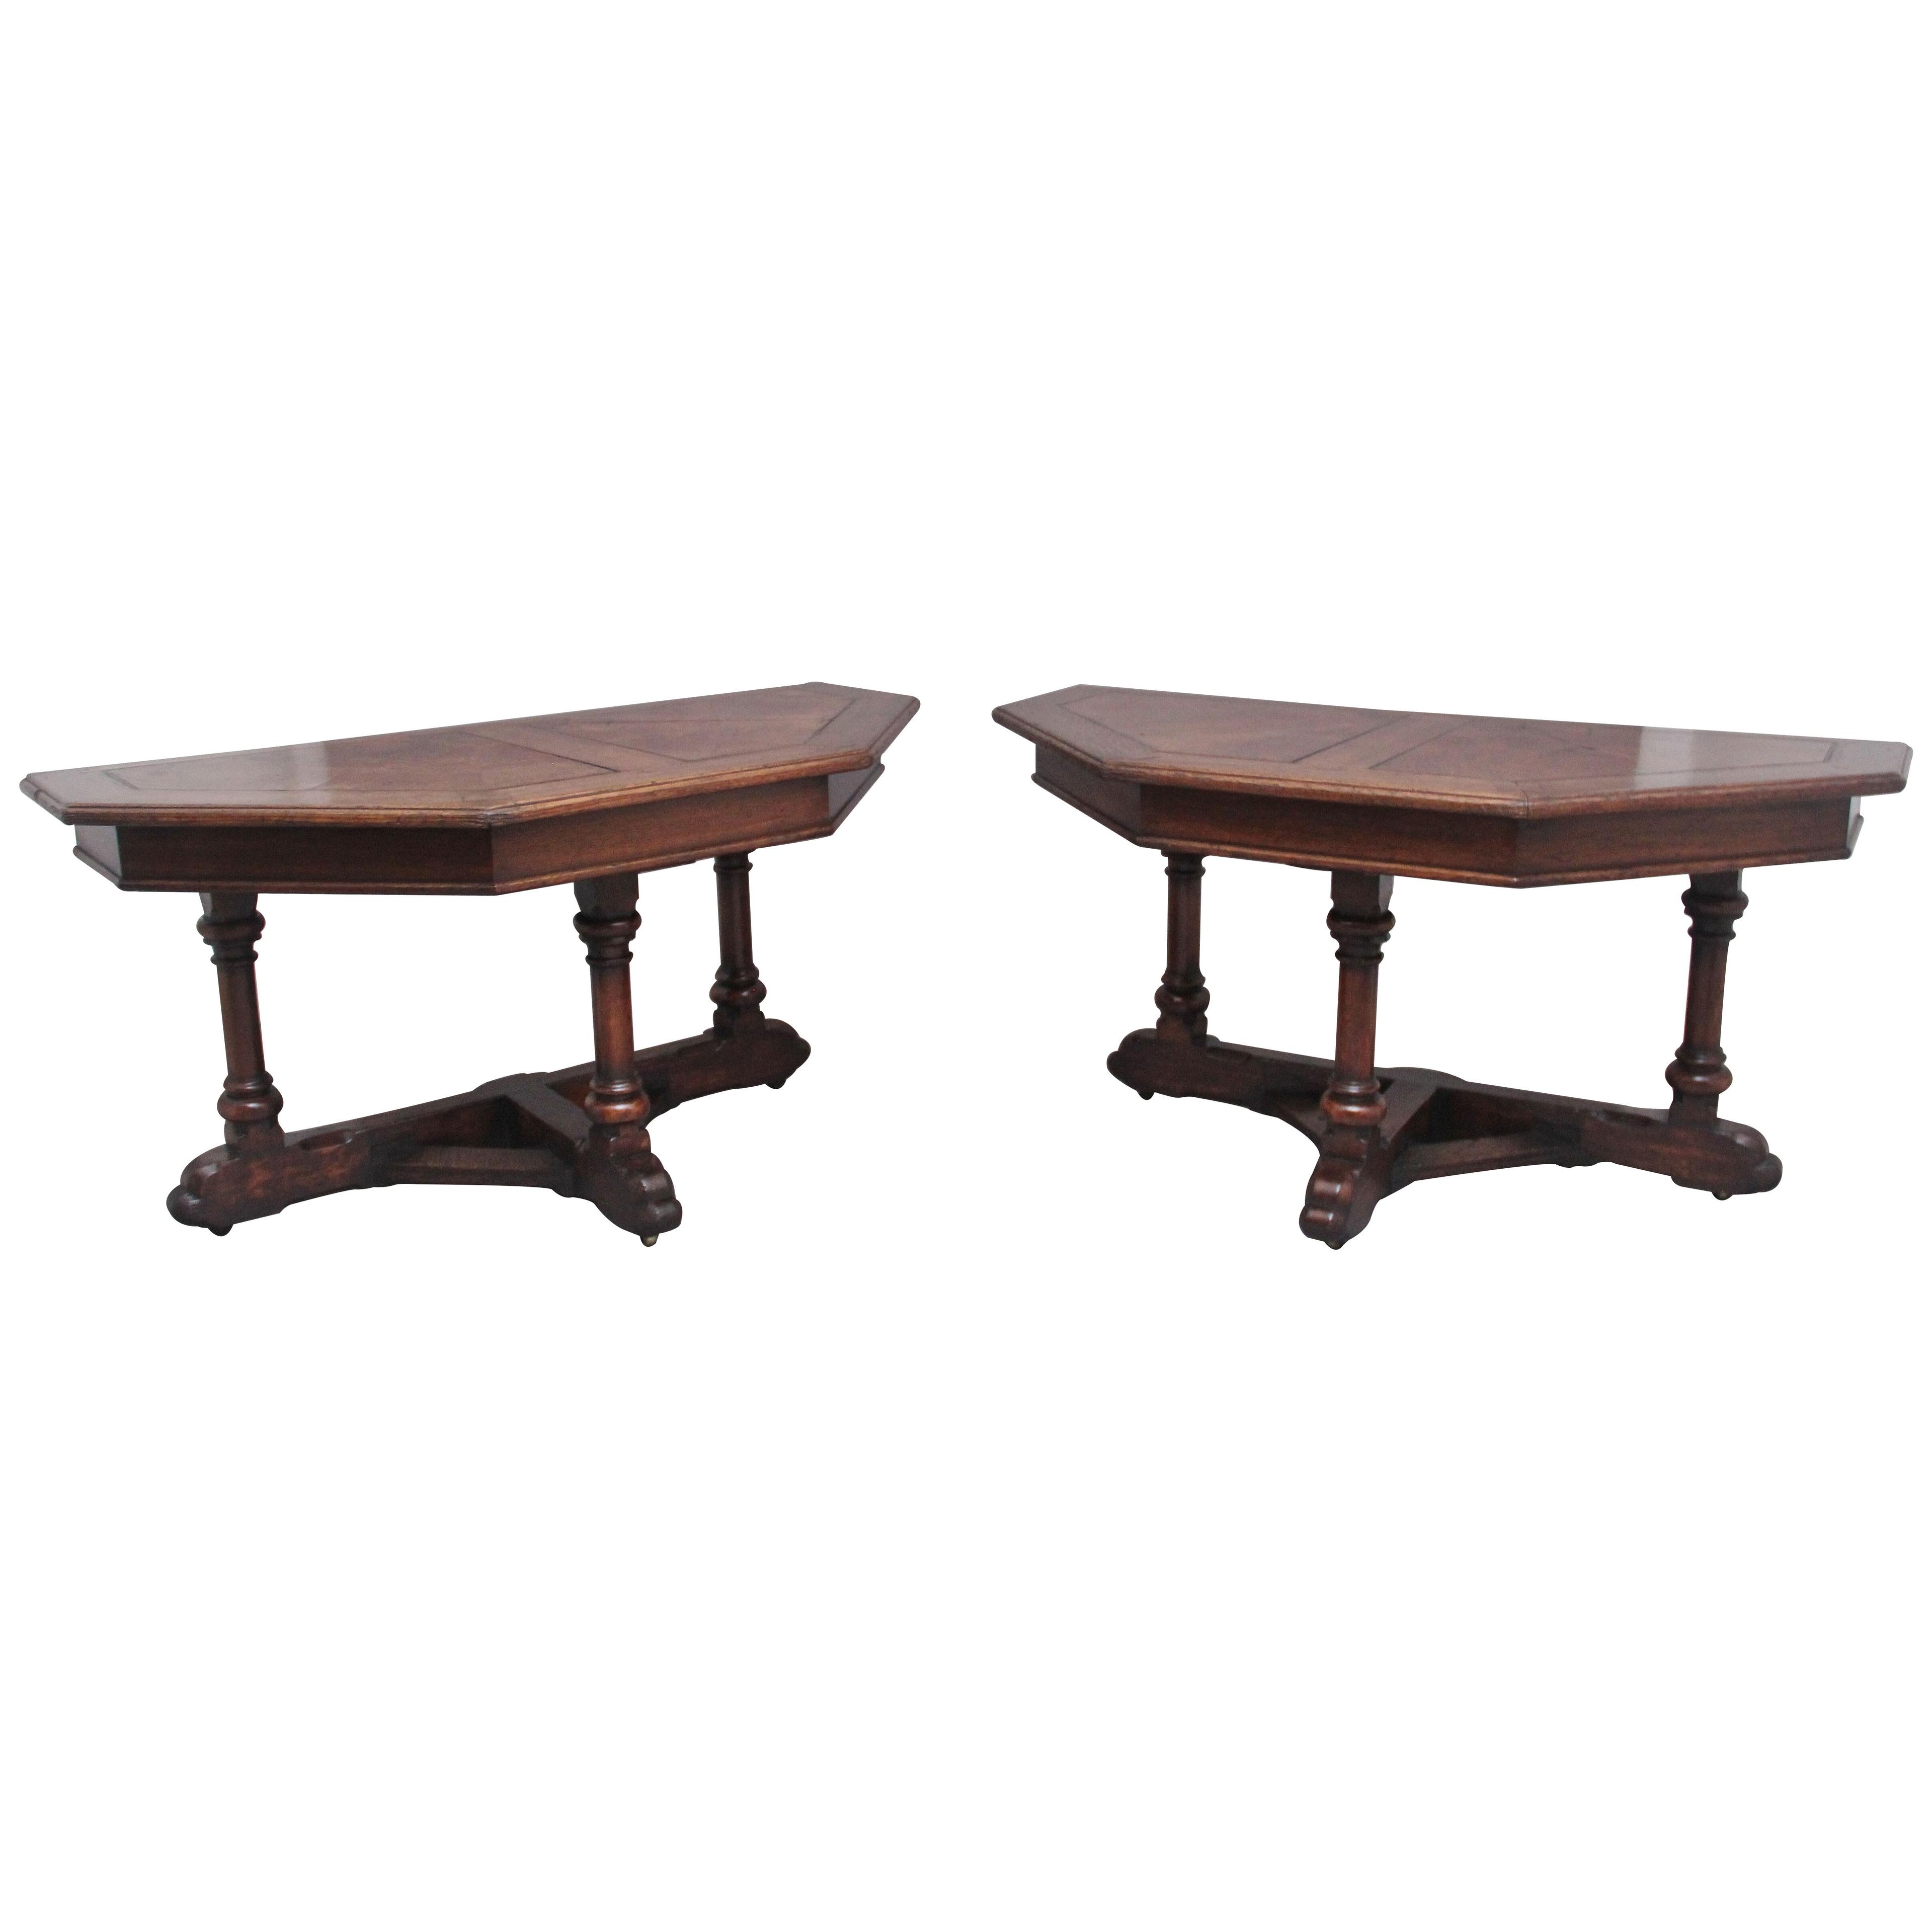 A pair of early 19th Century oak console tables